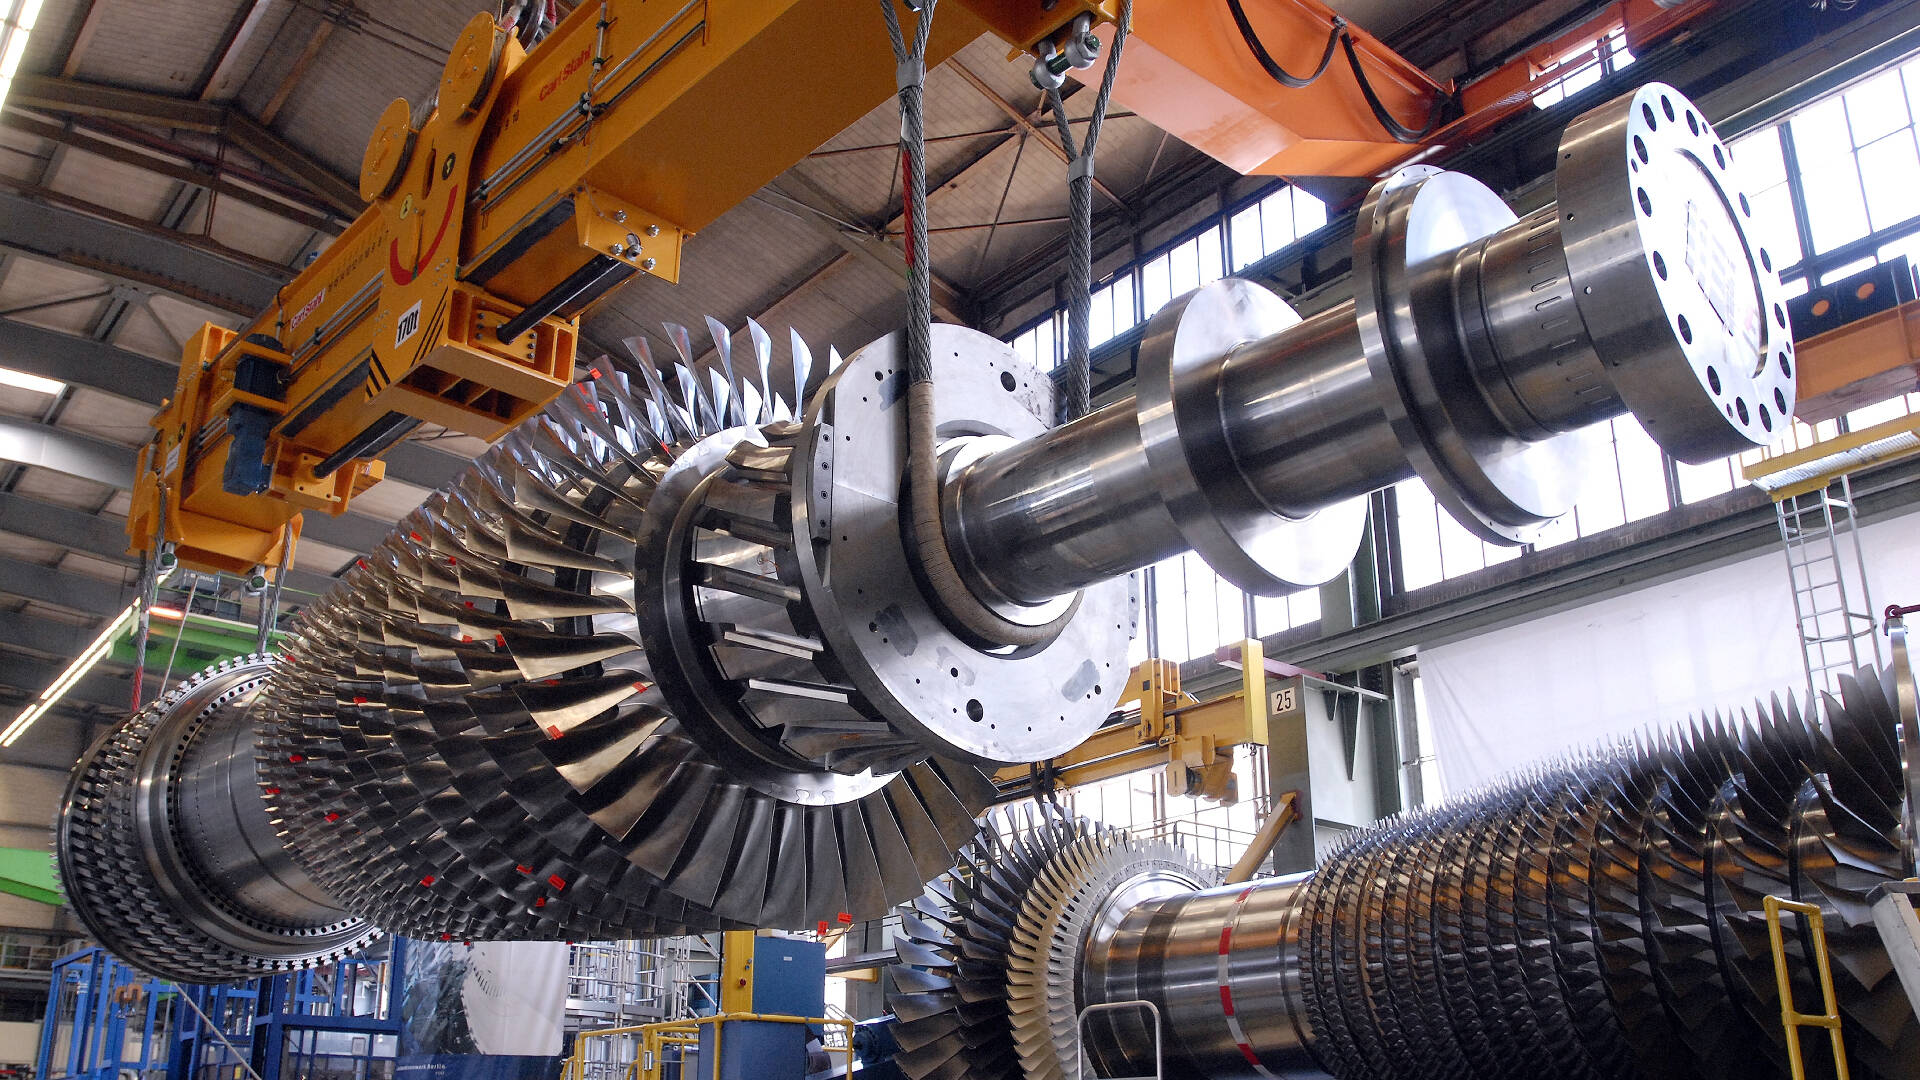 ClientEarth appeals court ruling to uphold consent for new gas turbines